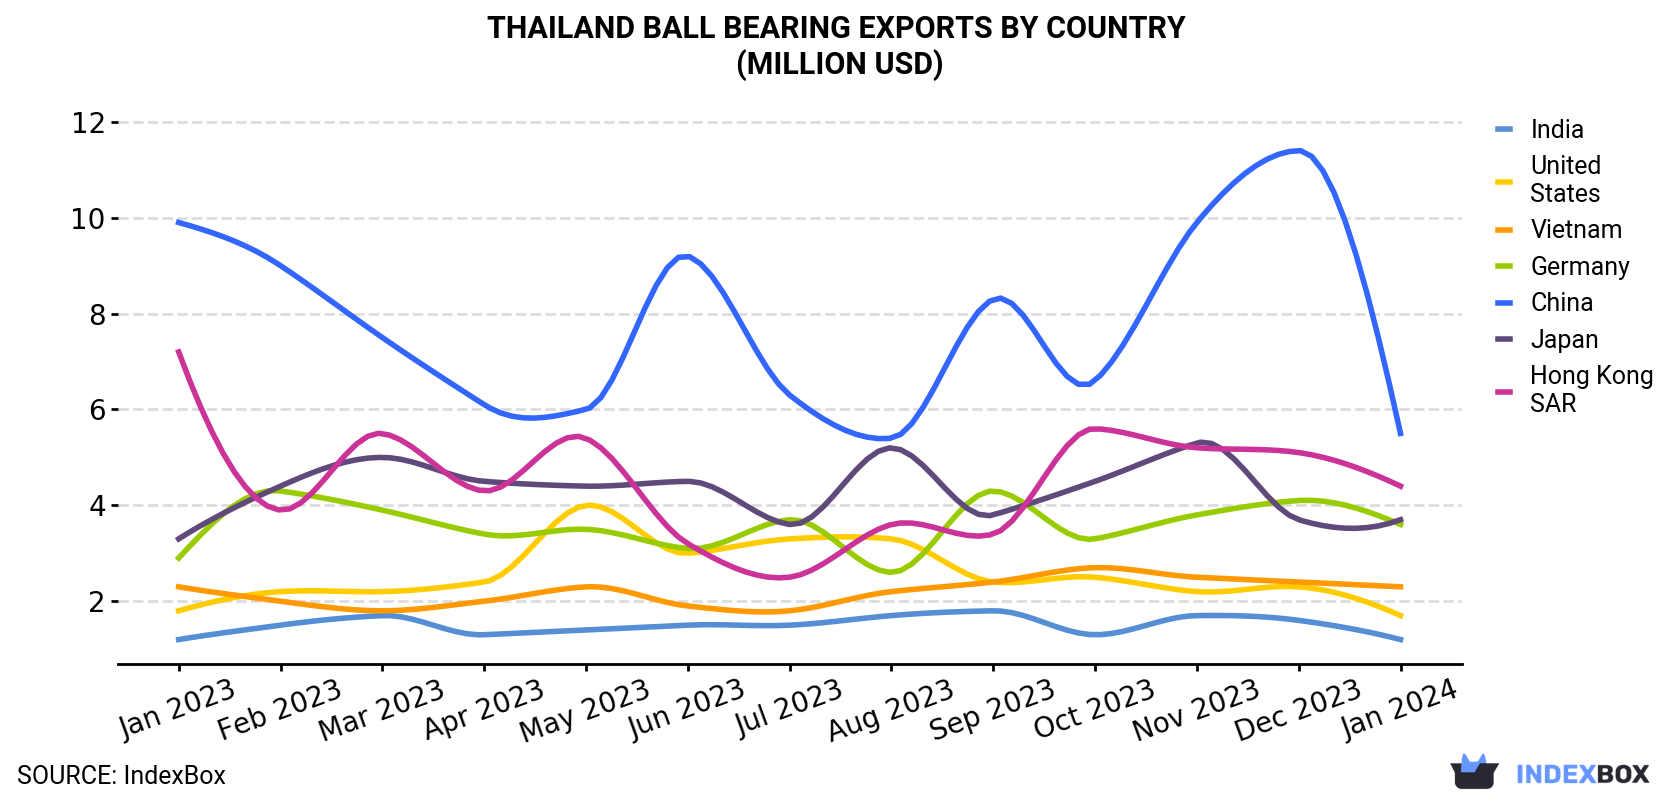 Thailand Ball Bearing Exports By Country (Million USD)